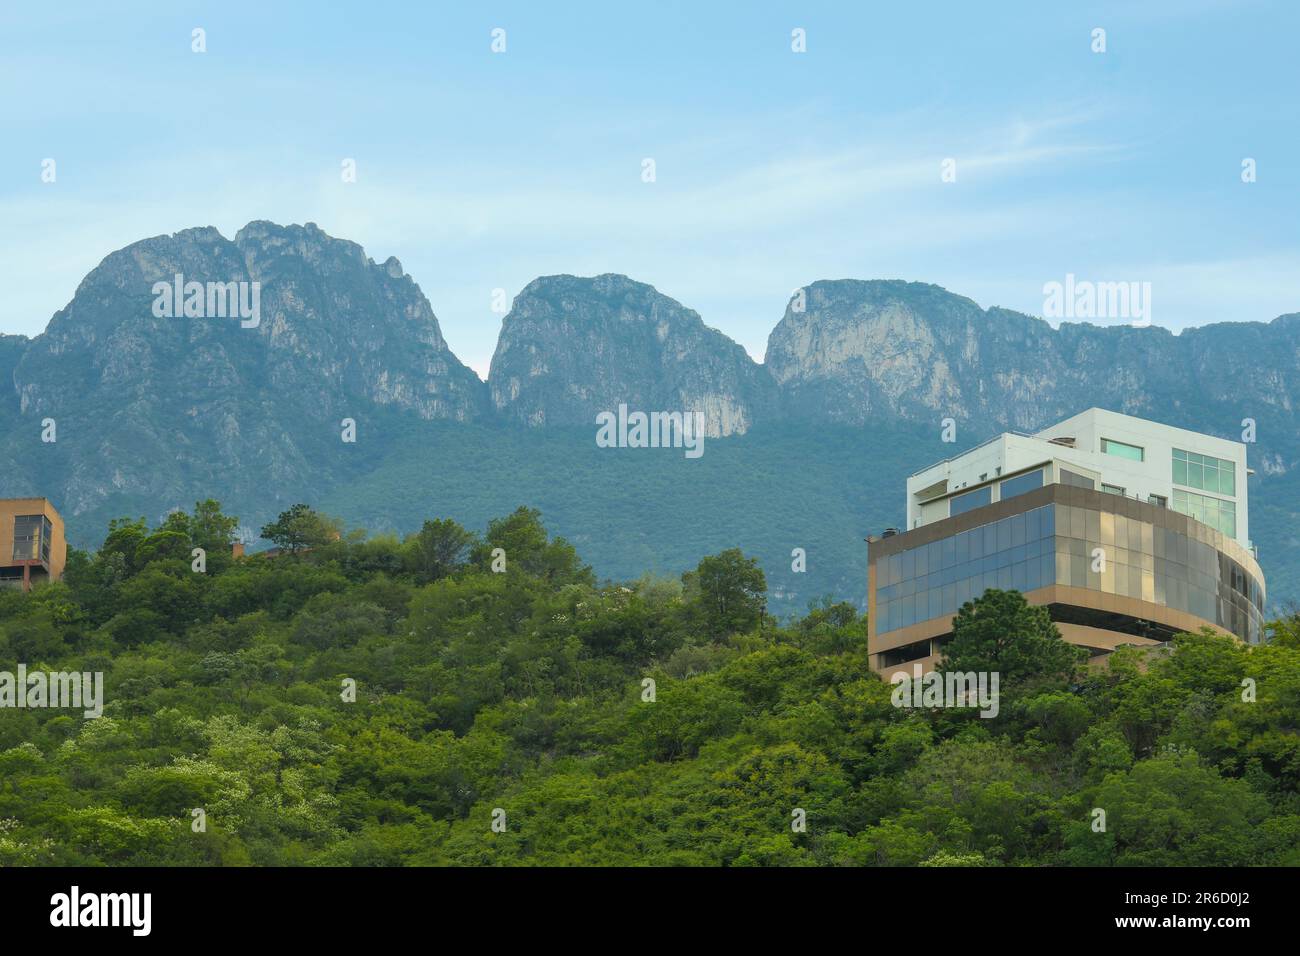 Beautiful view of building and green plants near mountains Stock Photo